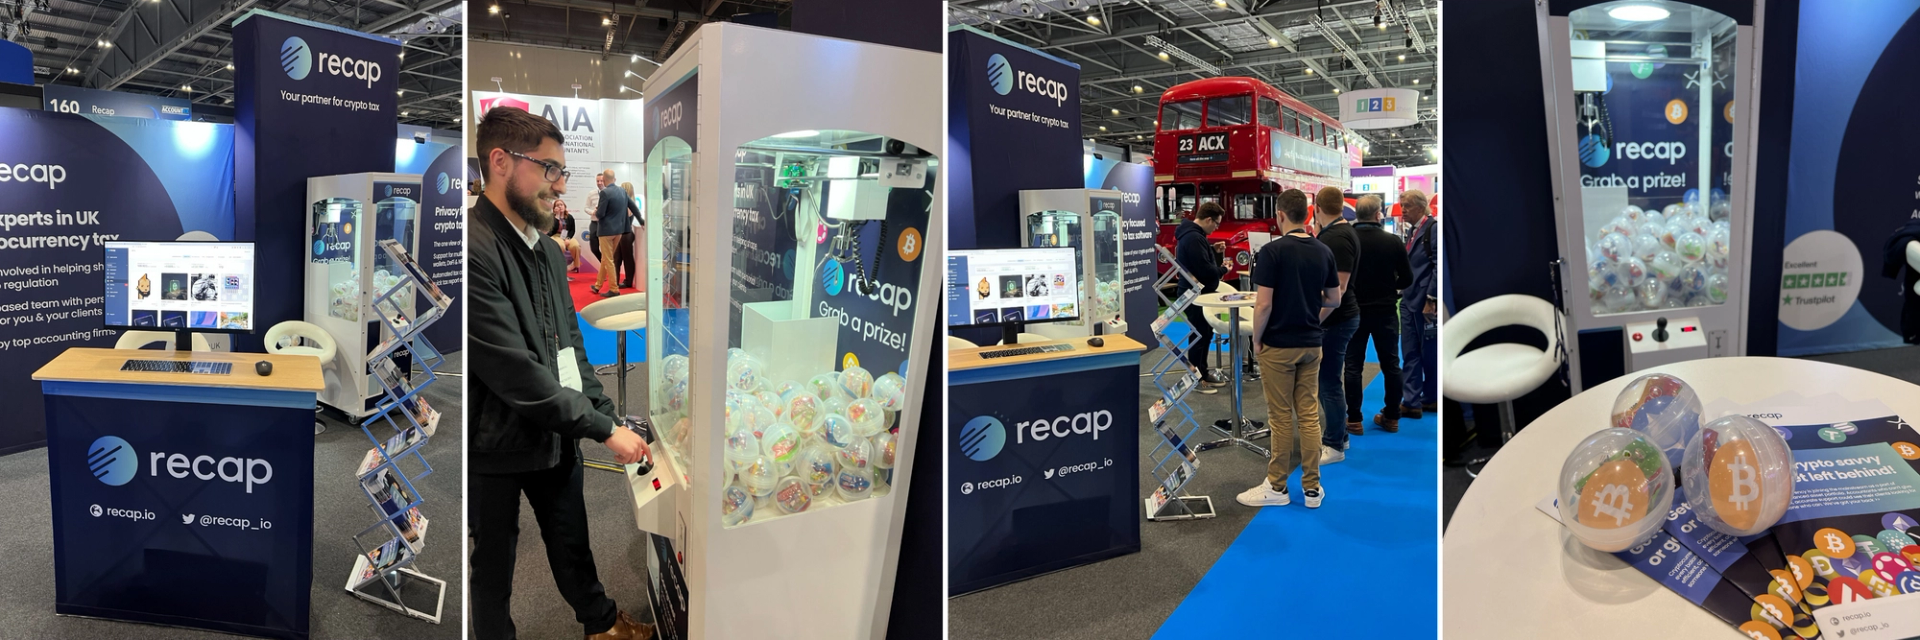 Recap's exhibition stand, demo platform and brochure stand, male playing on a prize grabber machine and a close up of brochures and prize capsules containing Bitcoin.